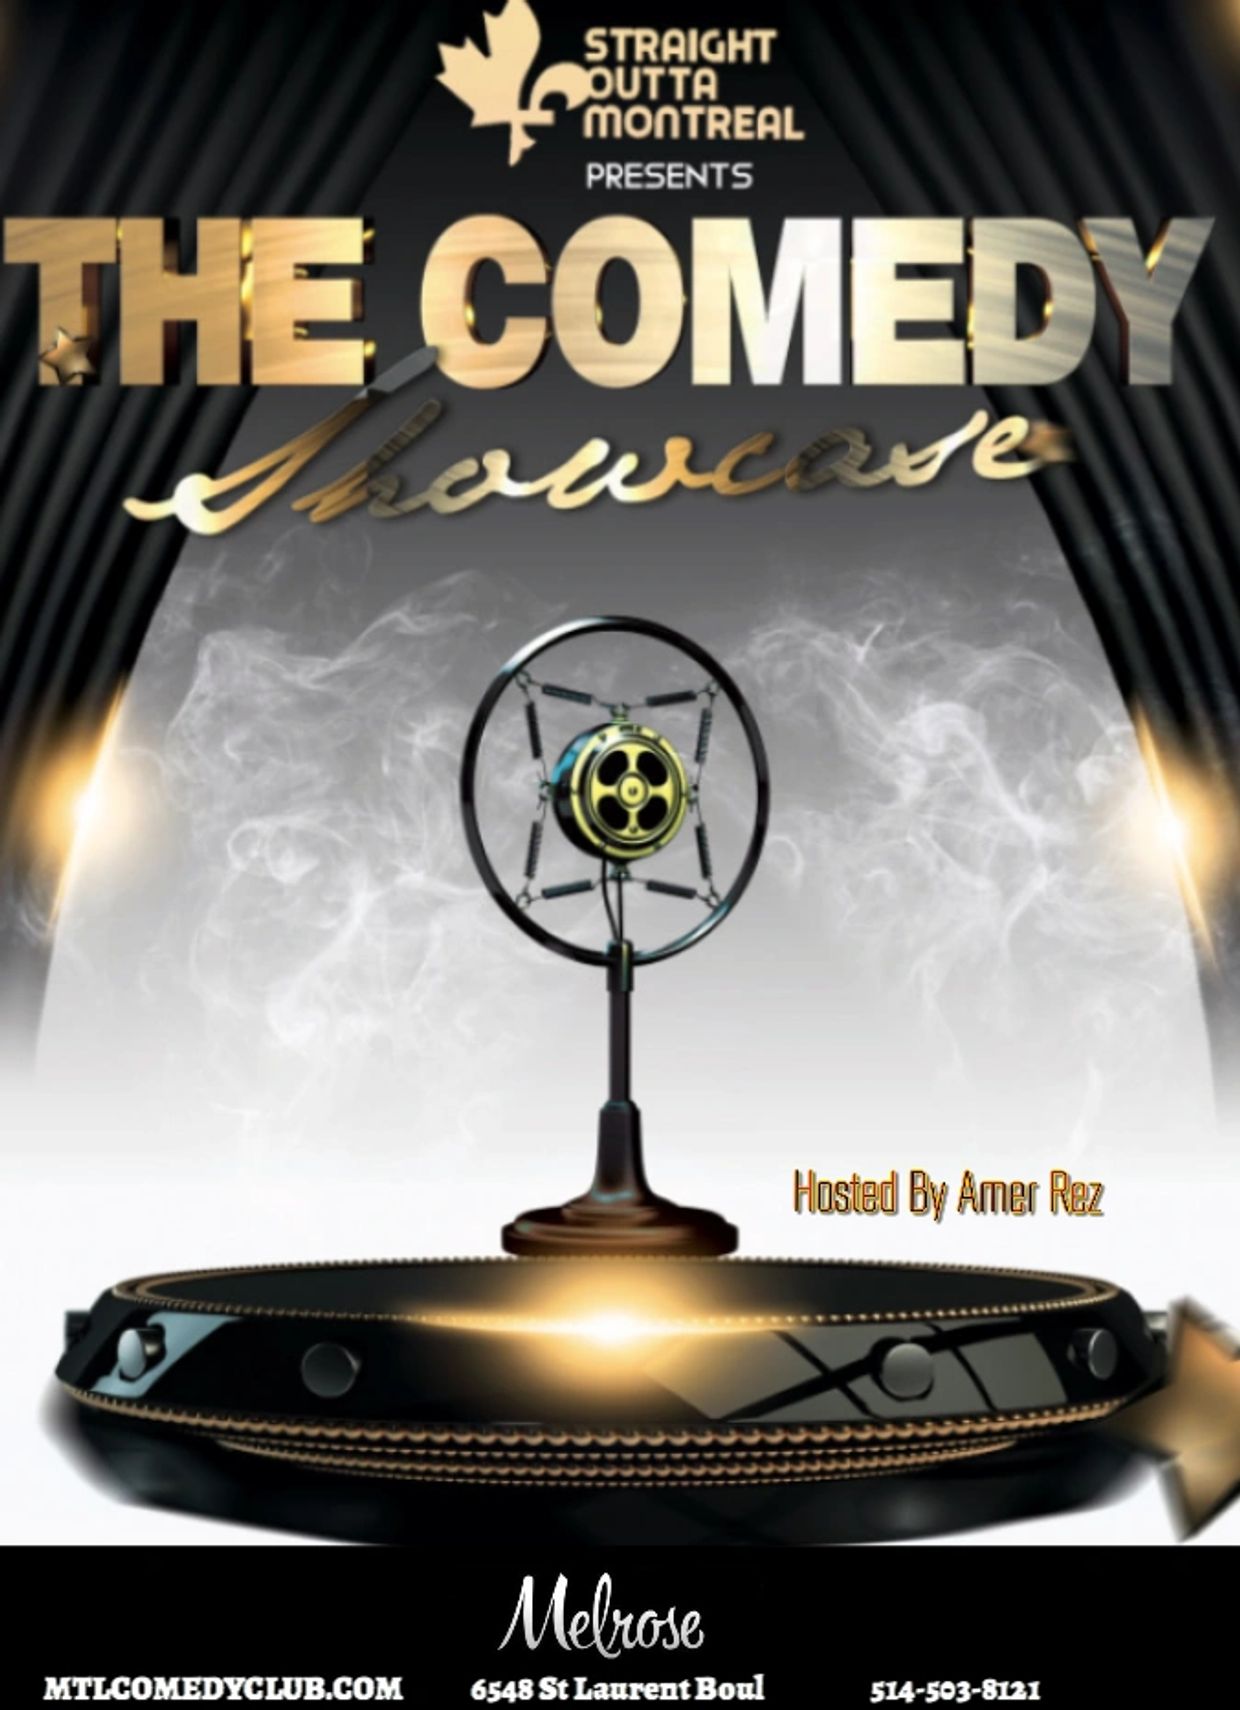 Melrose Comedy Extravaganza: Hilarious Stand-up in the Heart of the City!
MONTREALJOKES.COM